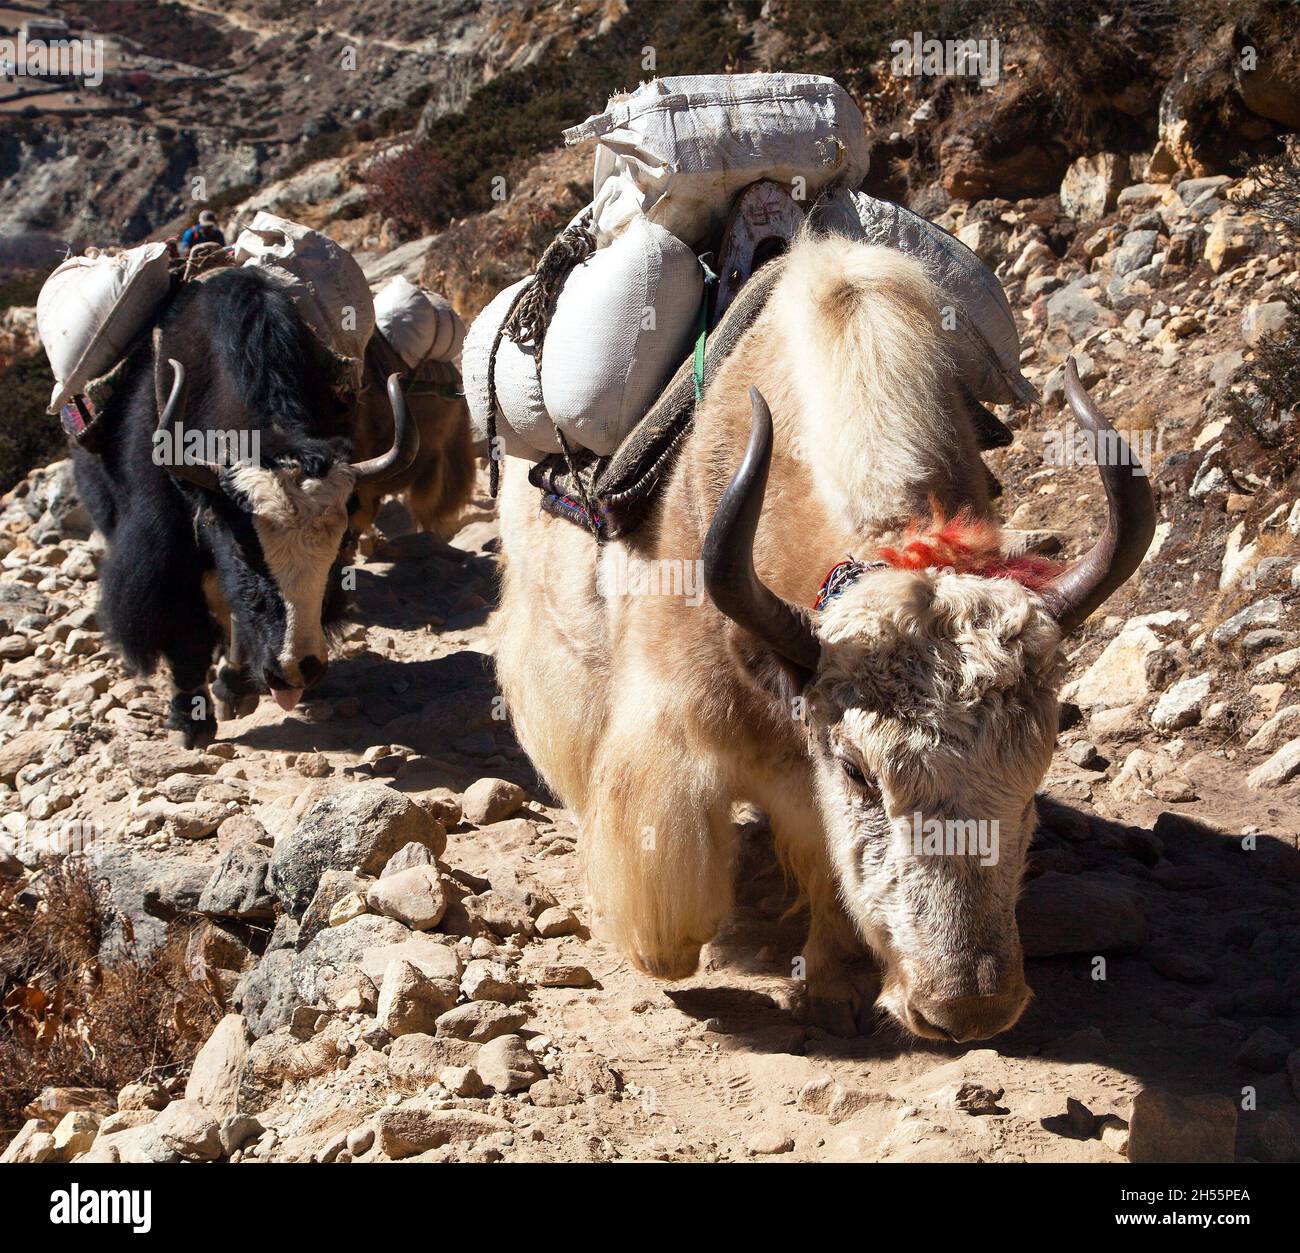 Caravan of yaks, bos grunniens or bos mutus, on the way to Everest base camp - Nepal Himalayas mountains Stock Photo